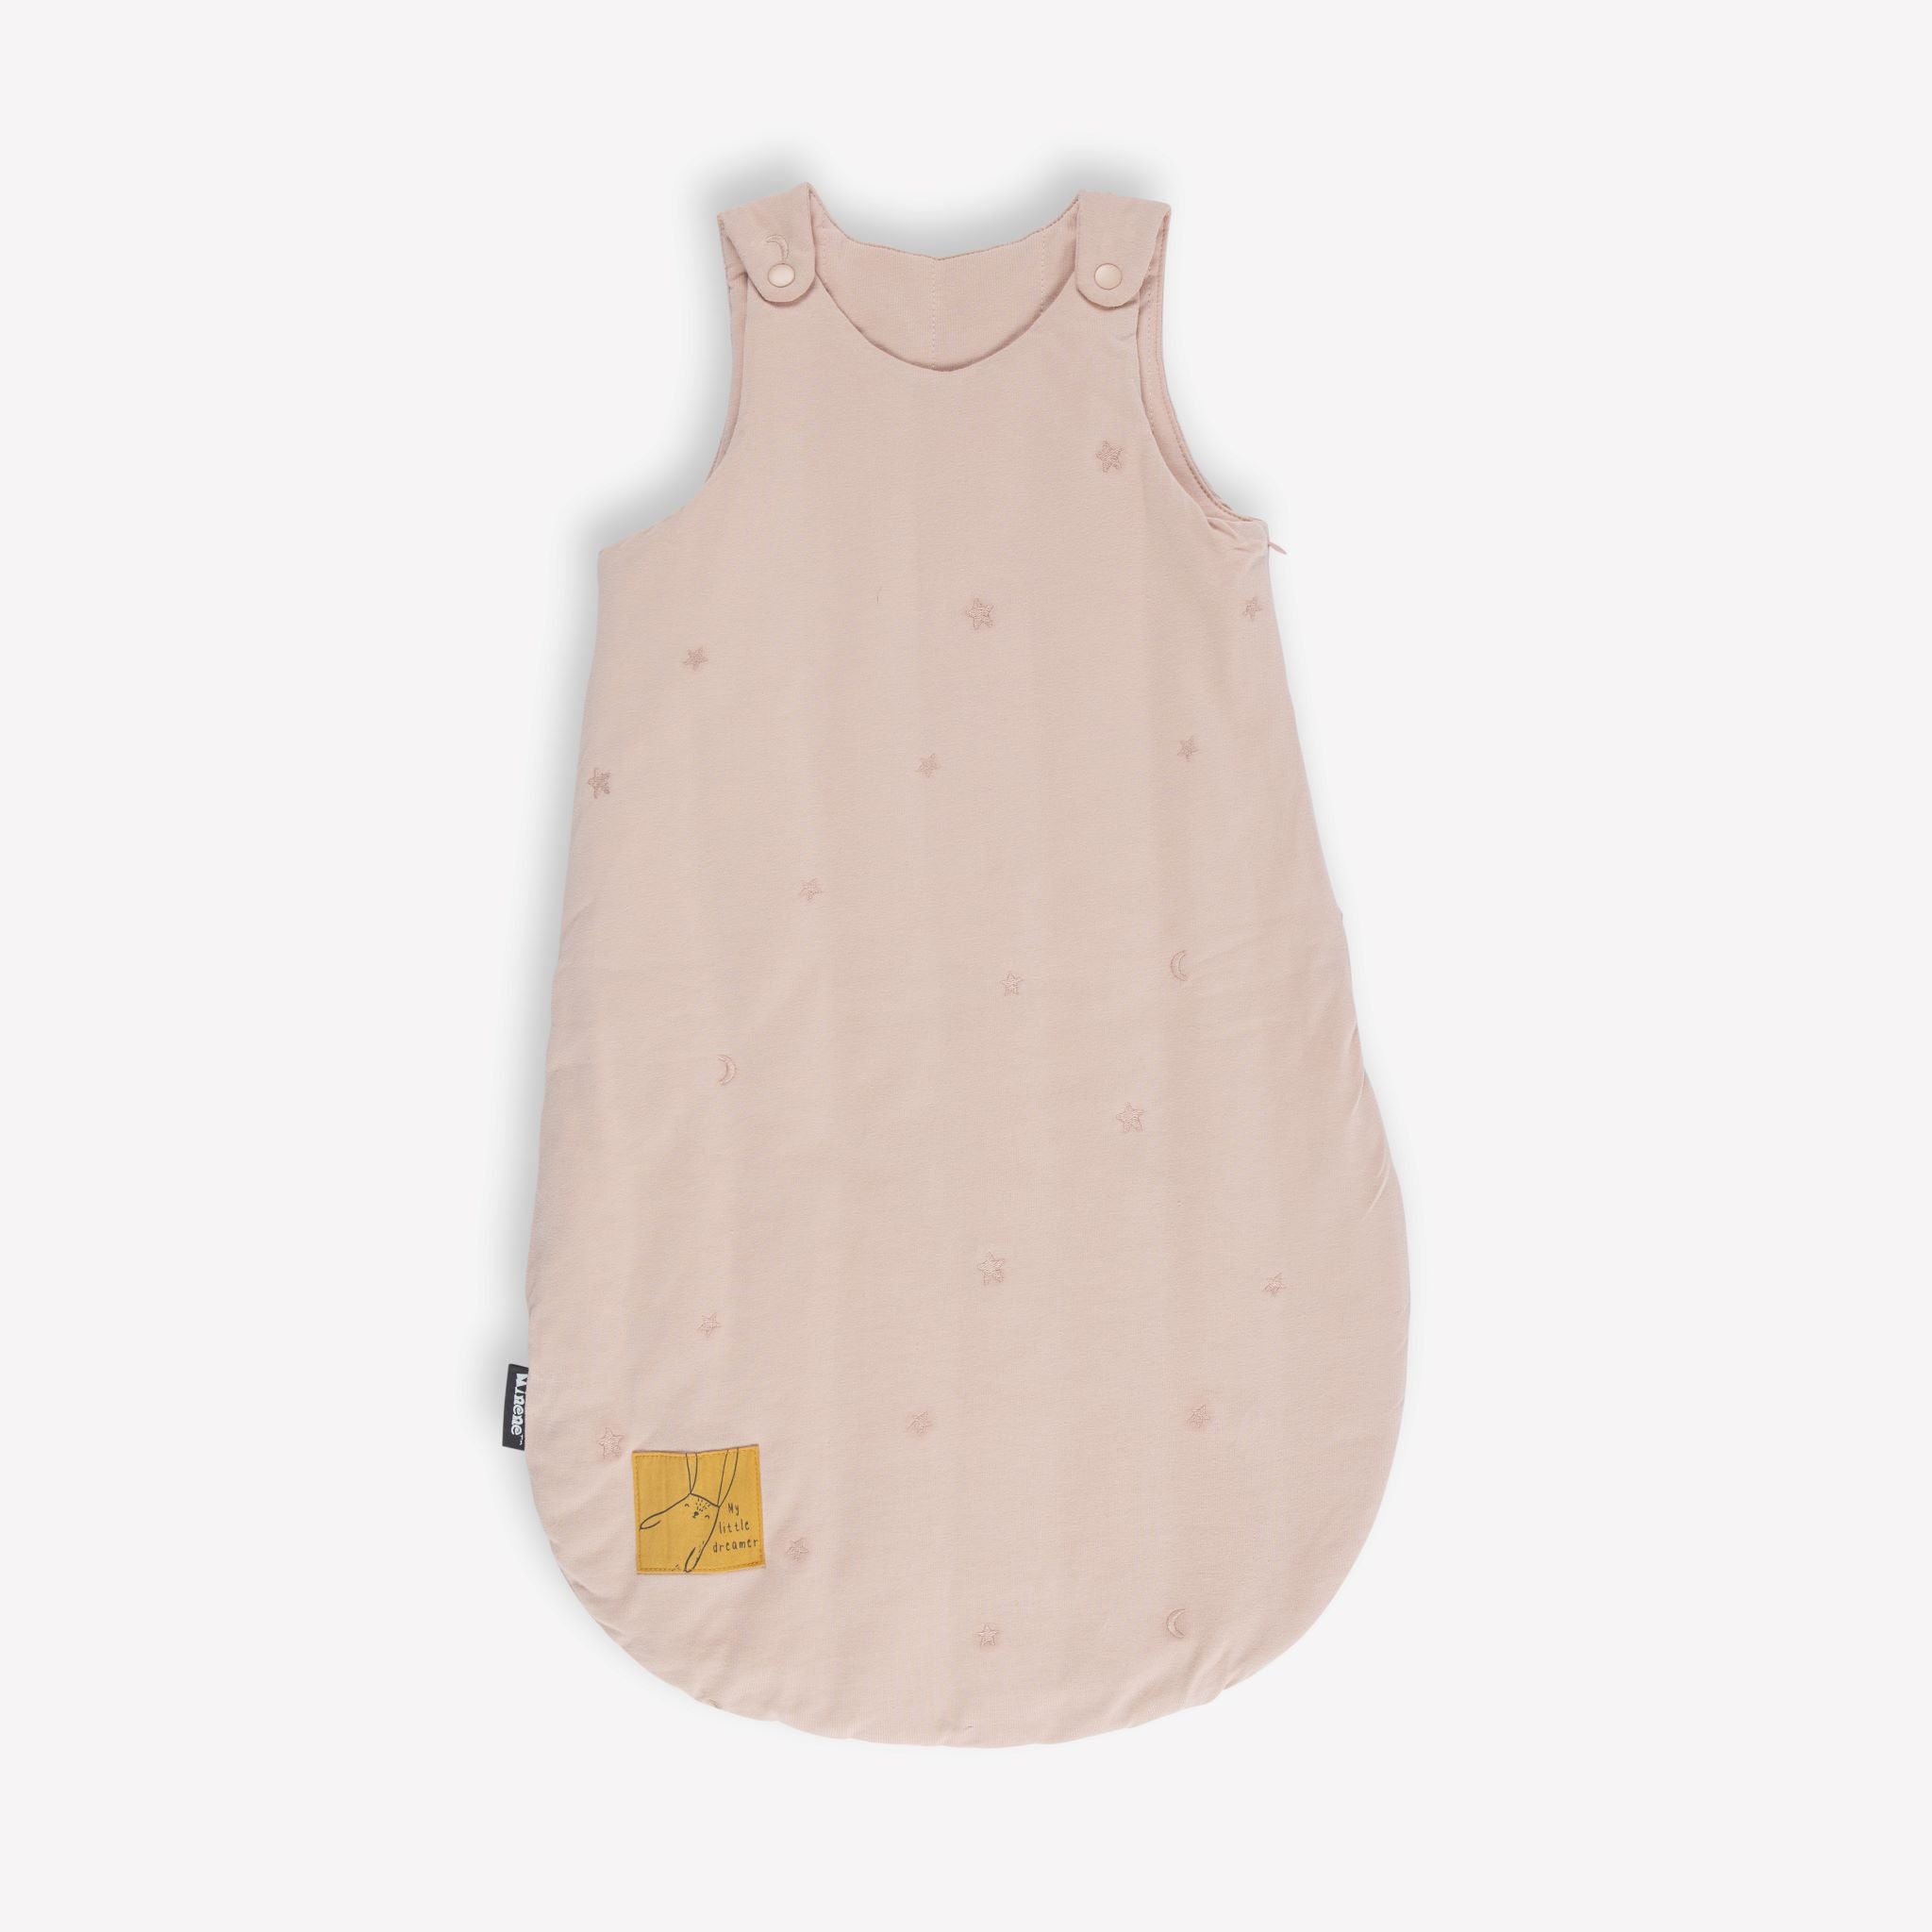 Jersey Sleeping Bag - Embroidery Collection!